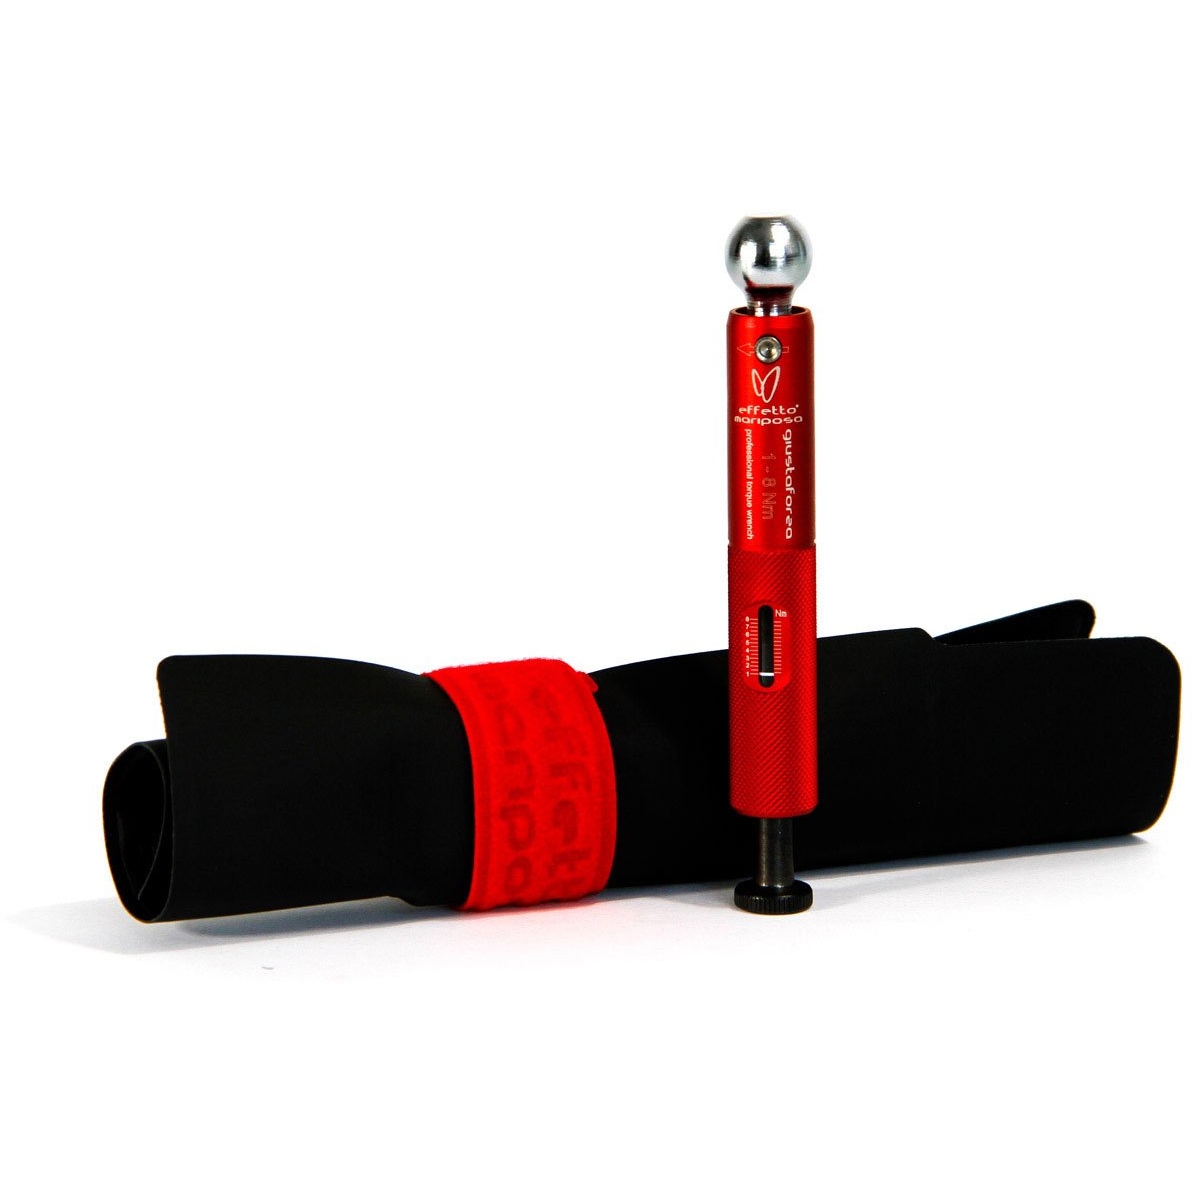 Picture of Effetto Mariposa Giustaforza Torque Wrench 1-8 Nm DELUXE incl. bits - red-silver